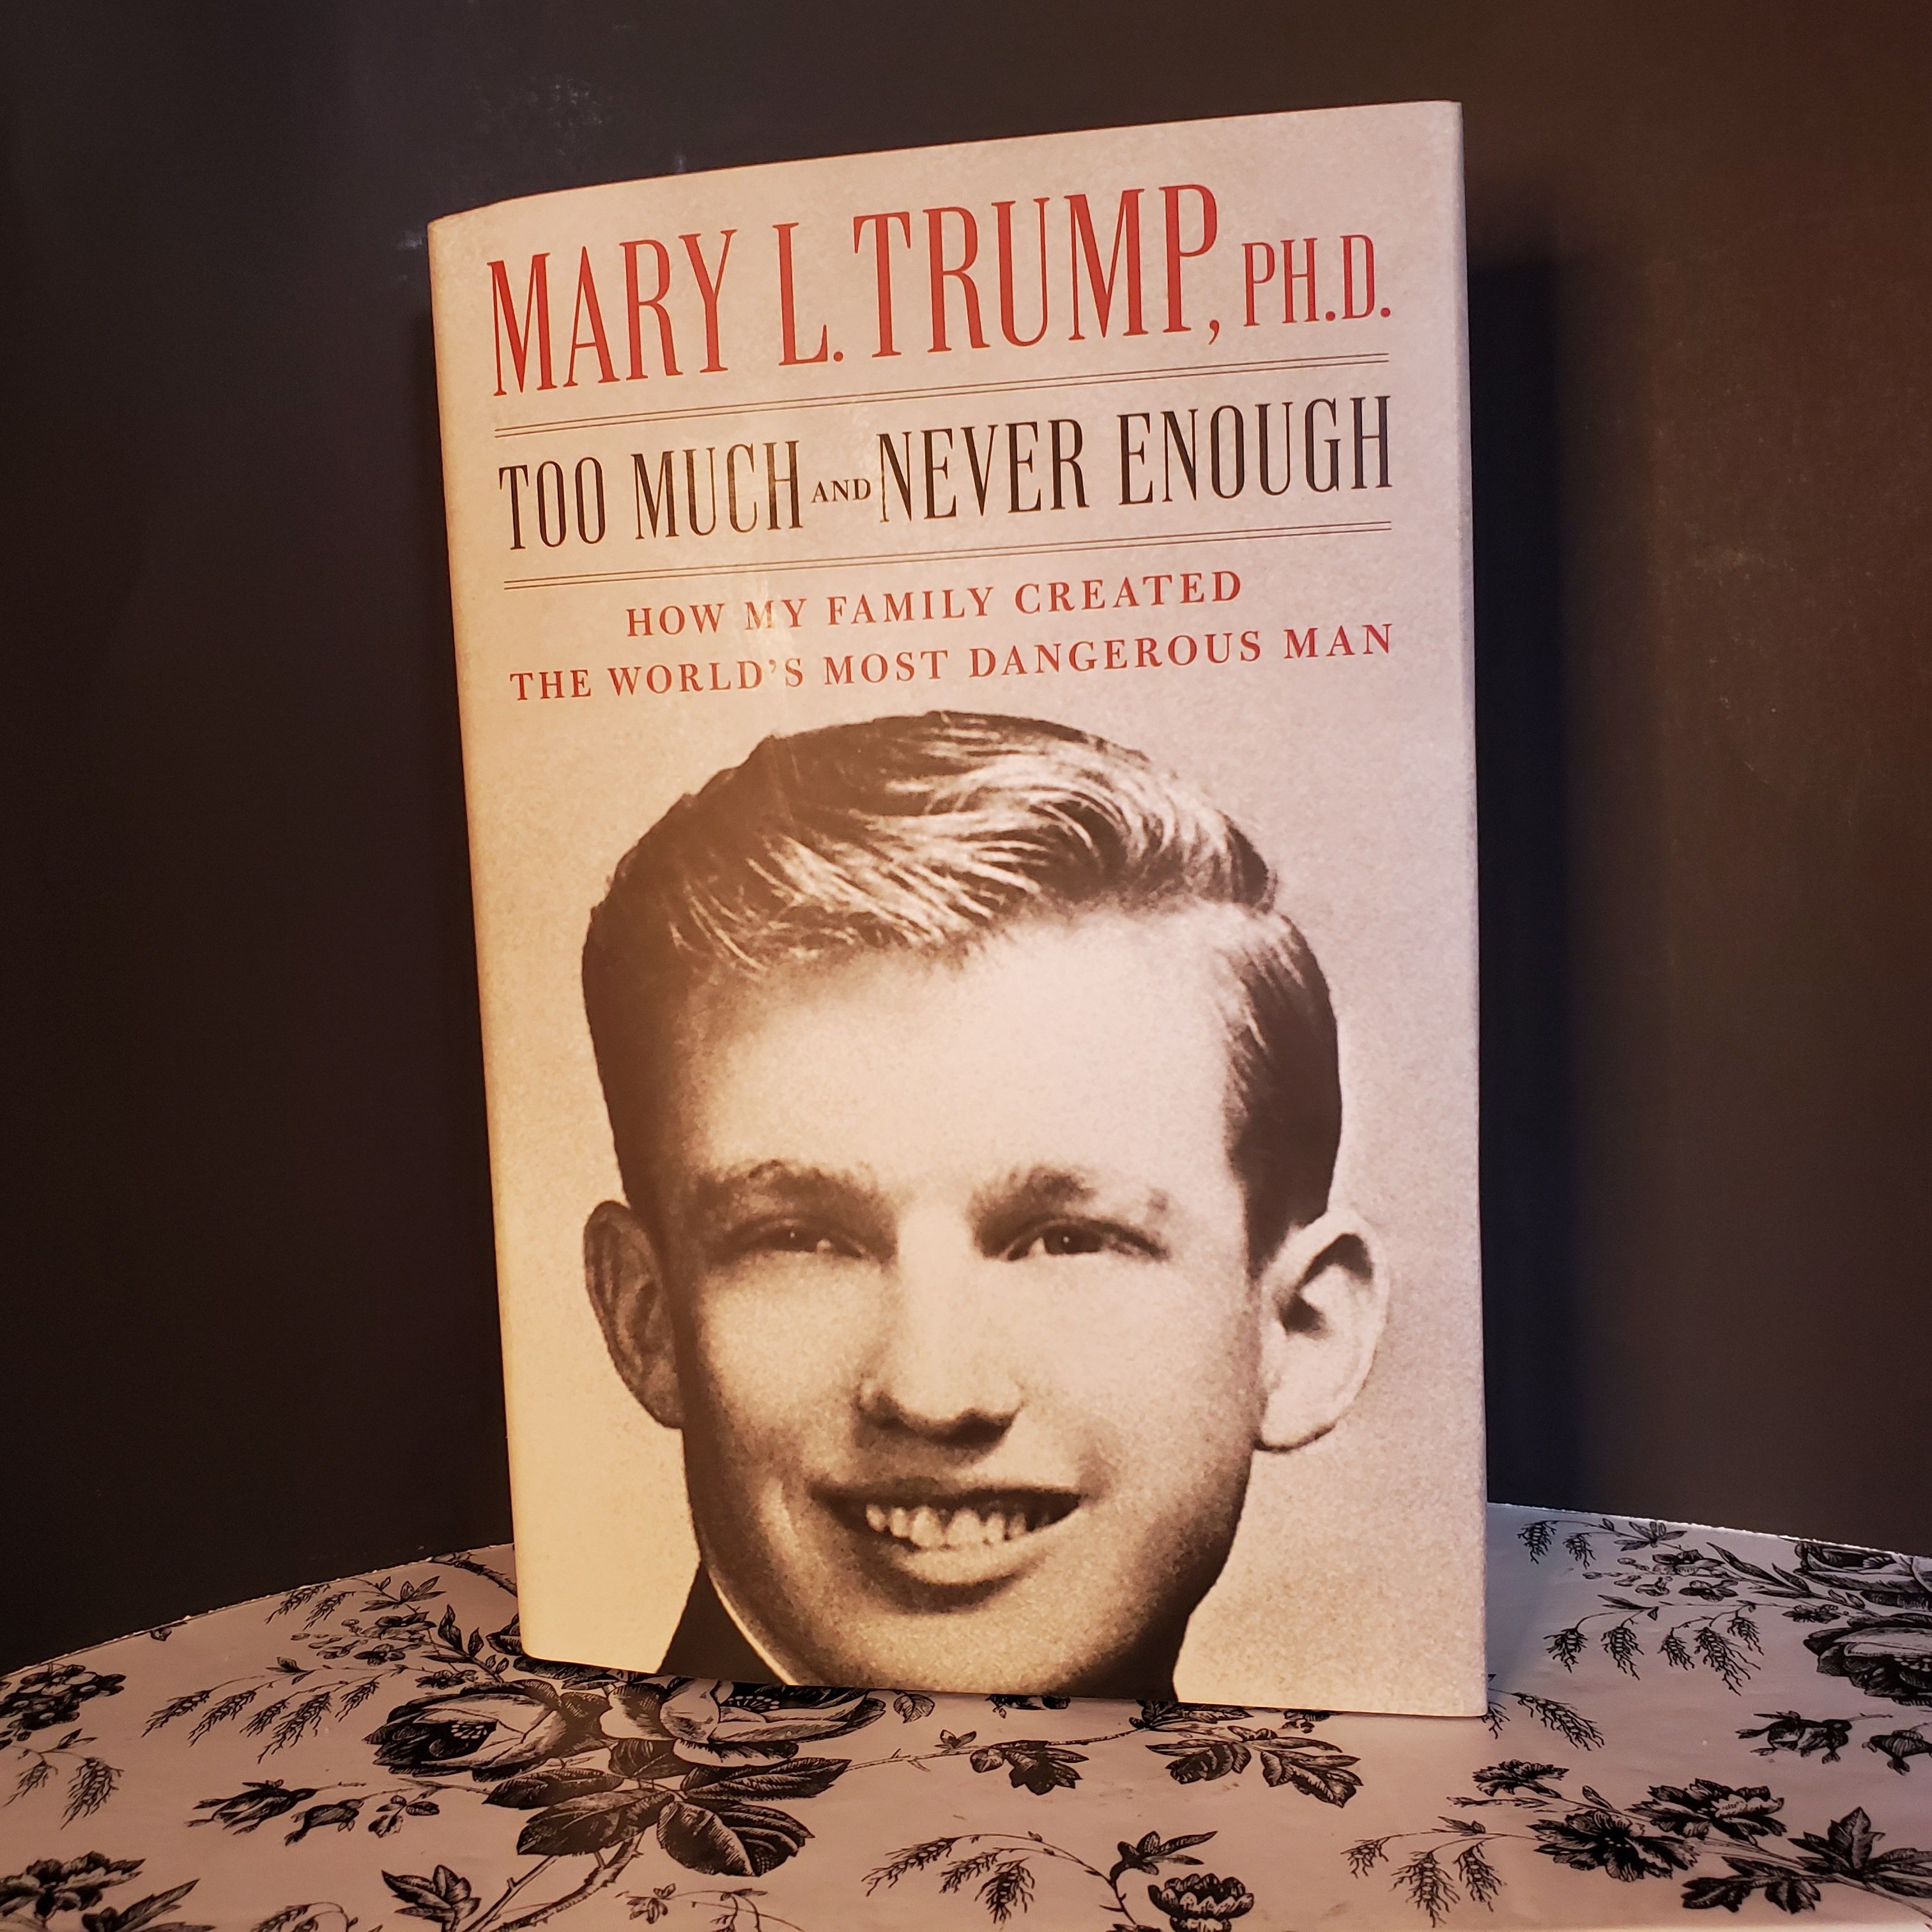 Trump Book "Too Much and Never Enough" by Mary L. Trump, PH.D.